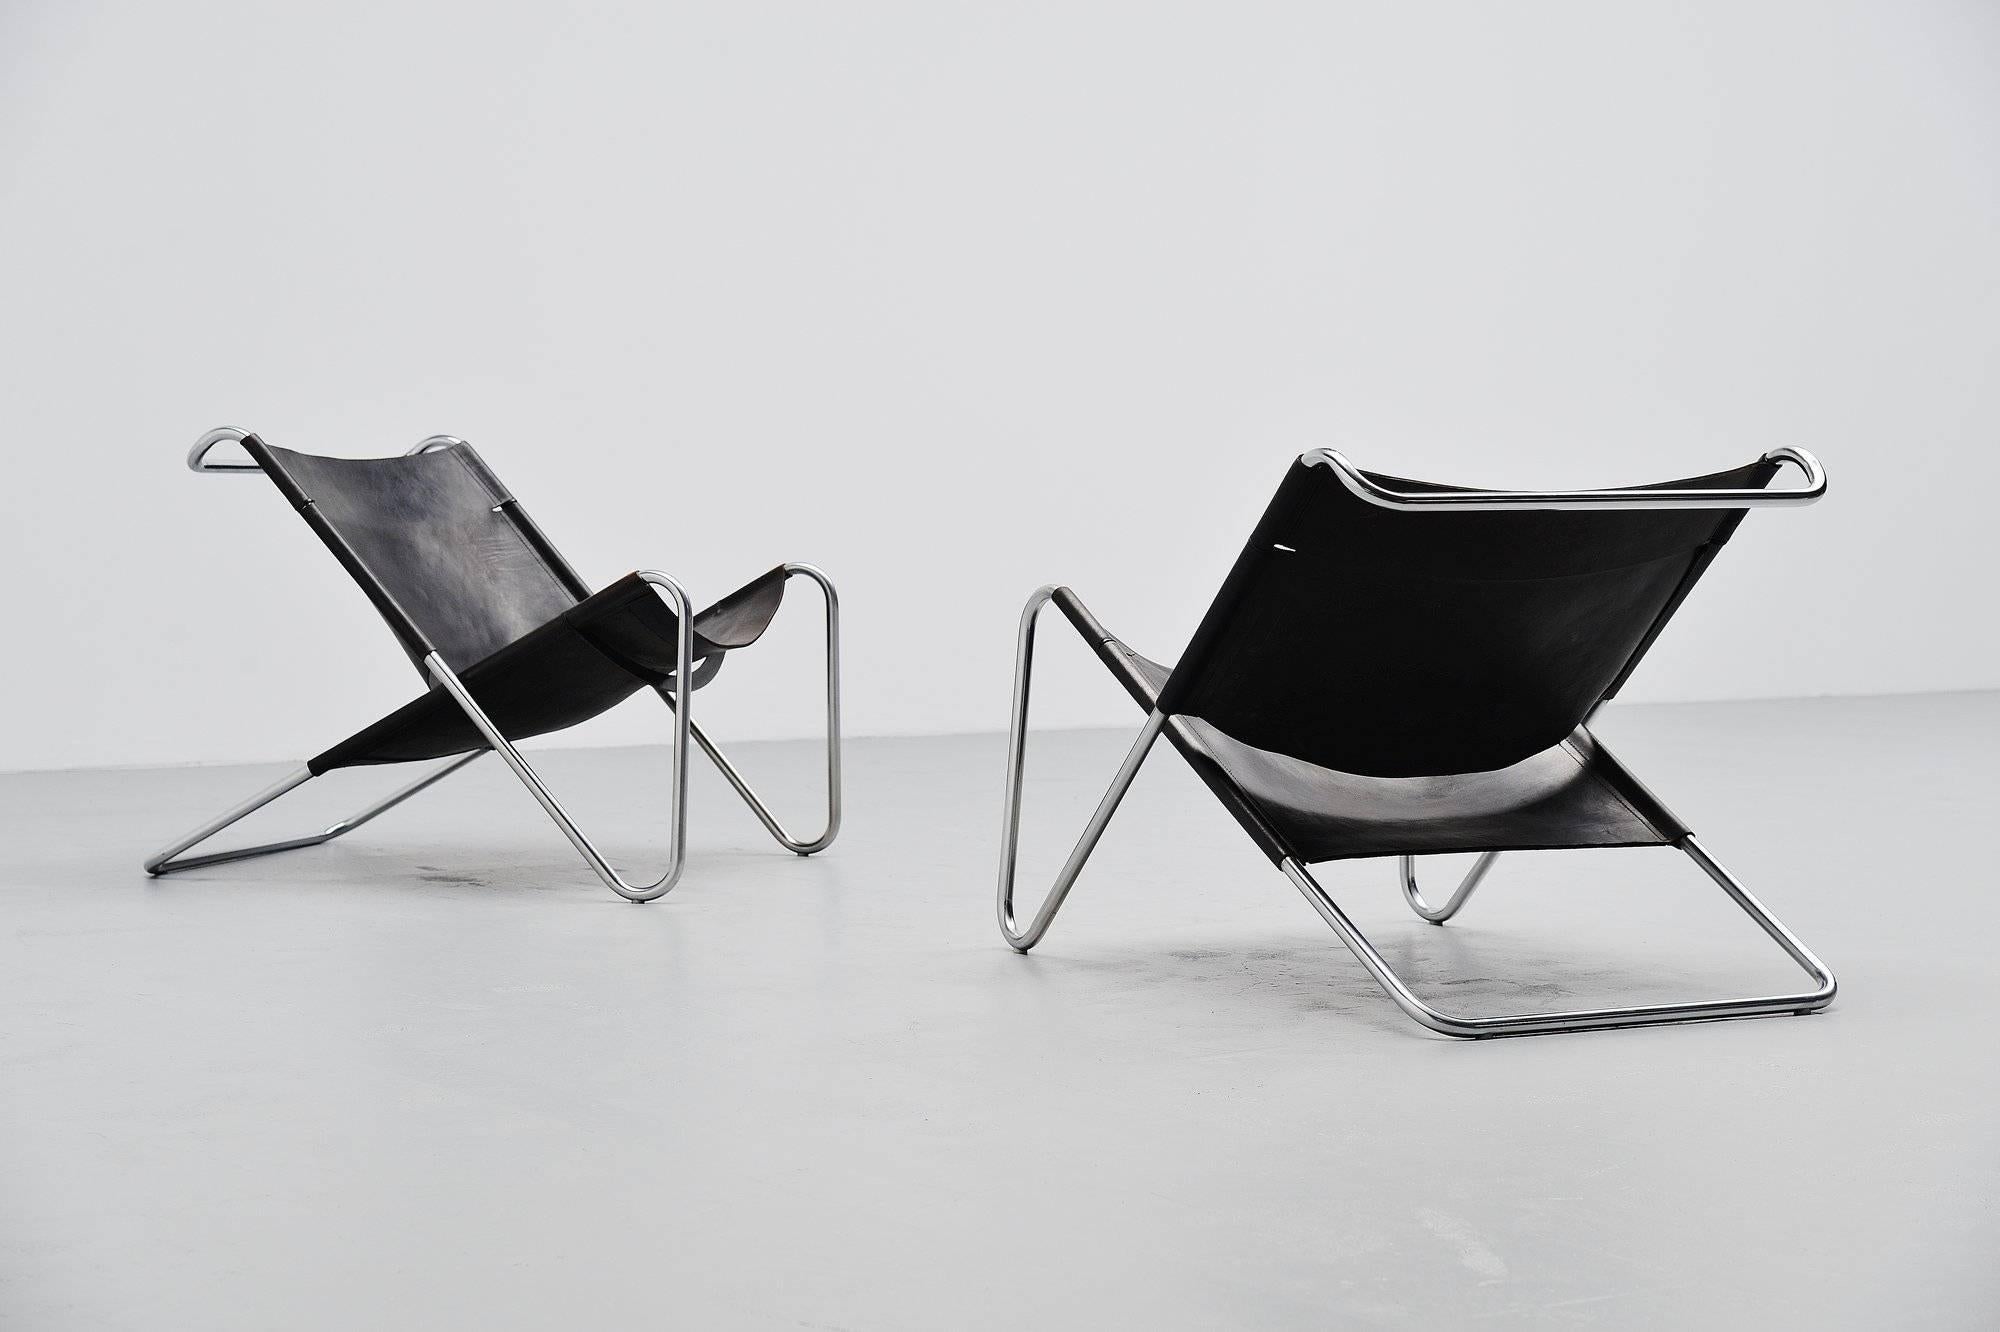 Ultra rare and amazing pair of lounge chairs designed by Chan Kwok Hoi, manufactured by ‘t Spectrum Holland and was in the collection from 1973-1974. The exact production numbers are unknown but not more than 100 chairs were produced. These chairs